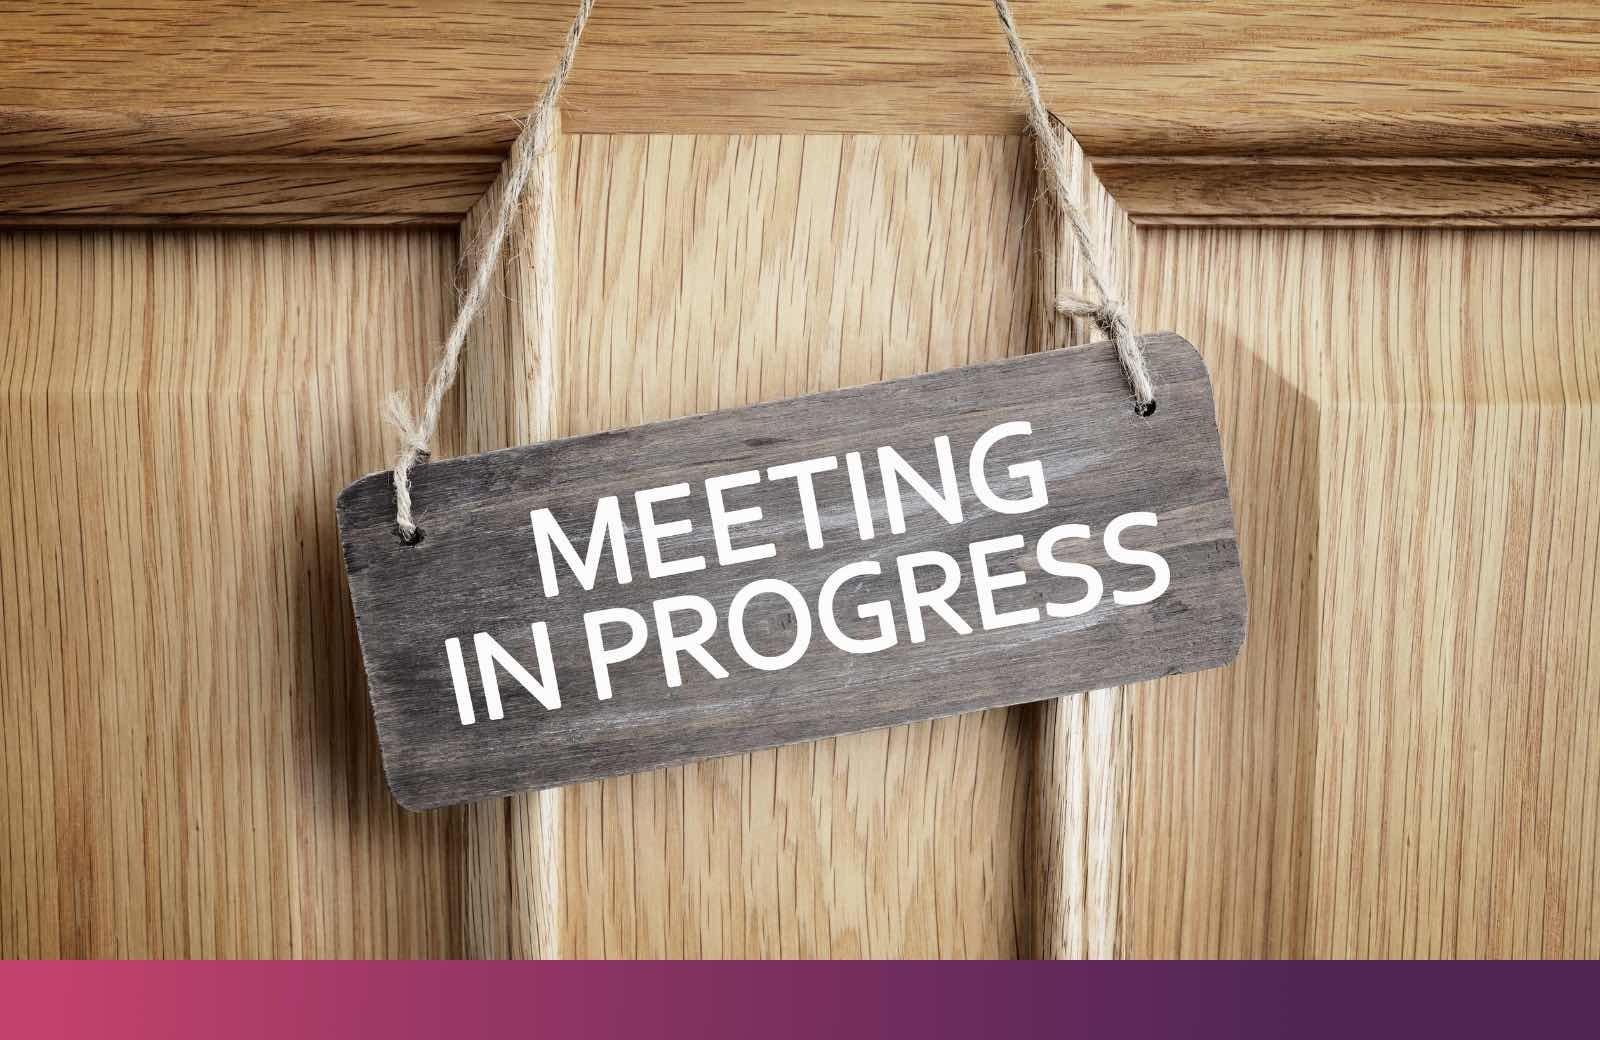 10 questions to make every minute count in your weekly progress meetings